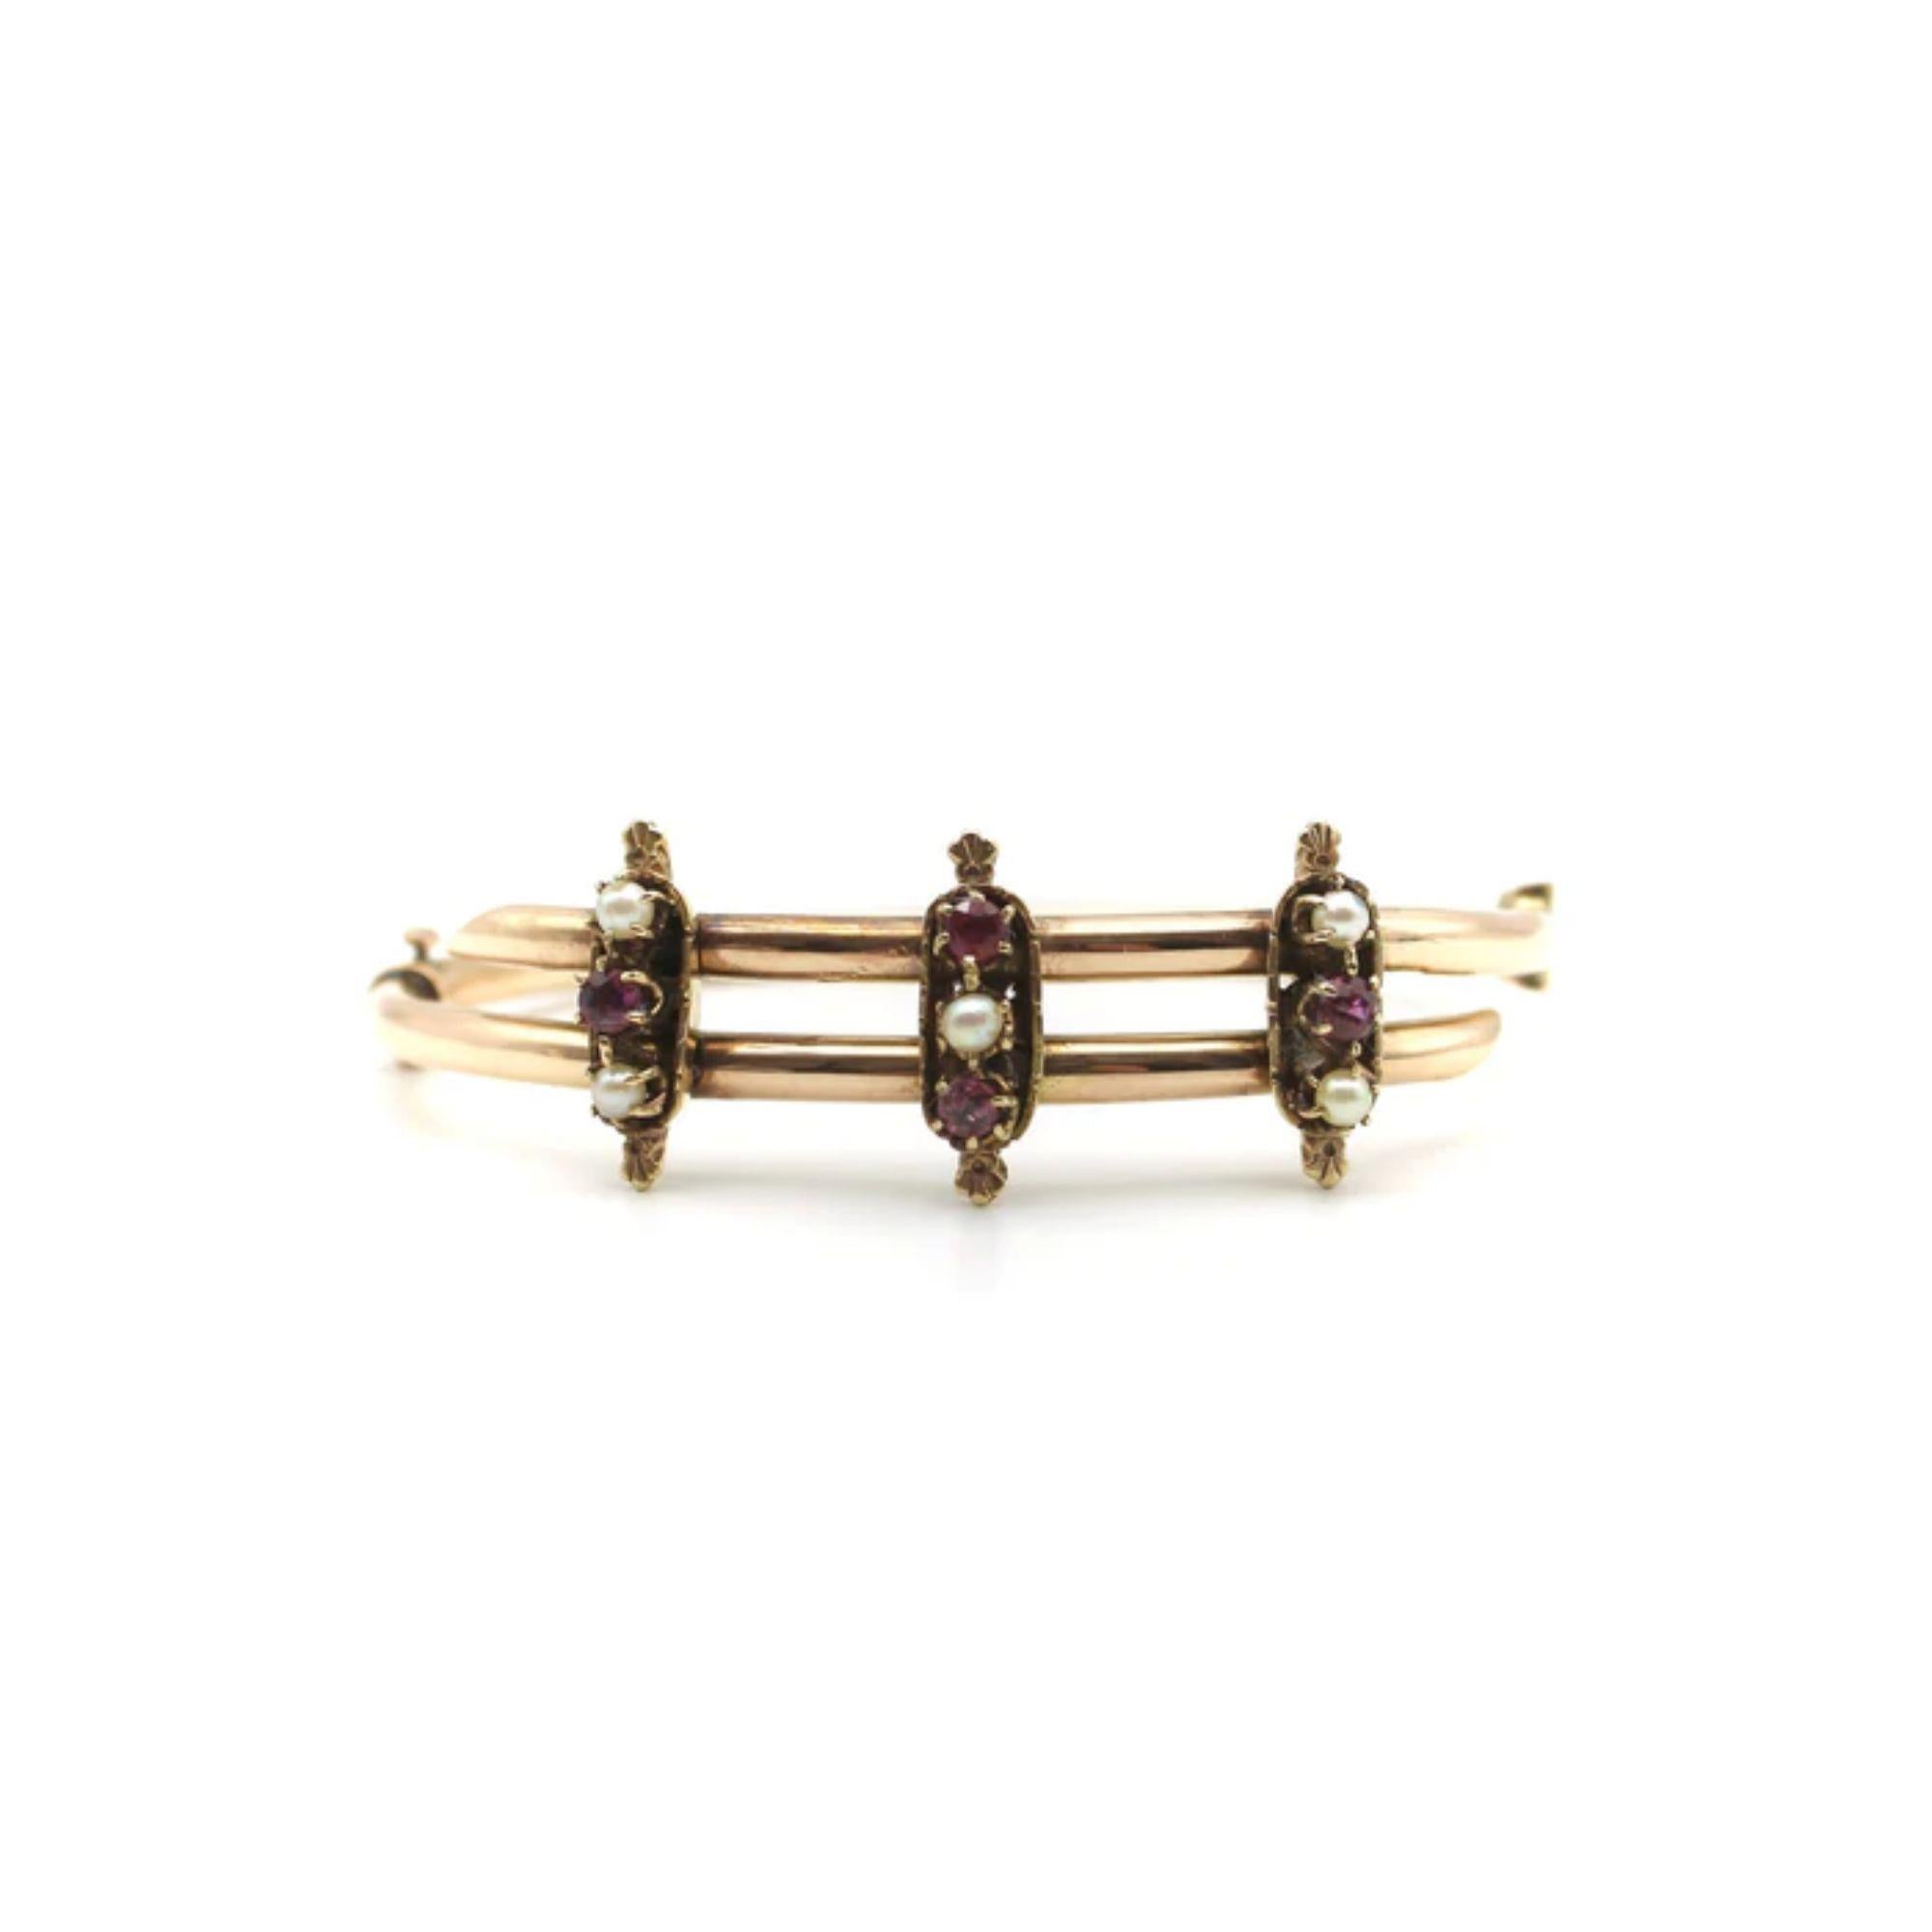 14K Rose Gold Etruscan Revival, Pearl, and Ruby Bracelet, circa 1880's
 
Circa the 1880’s, this gorgeous 14k rose gold bypass bracelet features ruby and pearl accents. The two ends of the bracelet cross over one another and are held together by